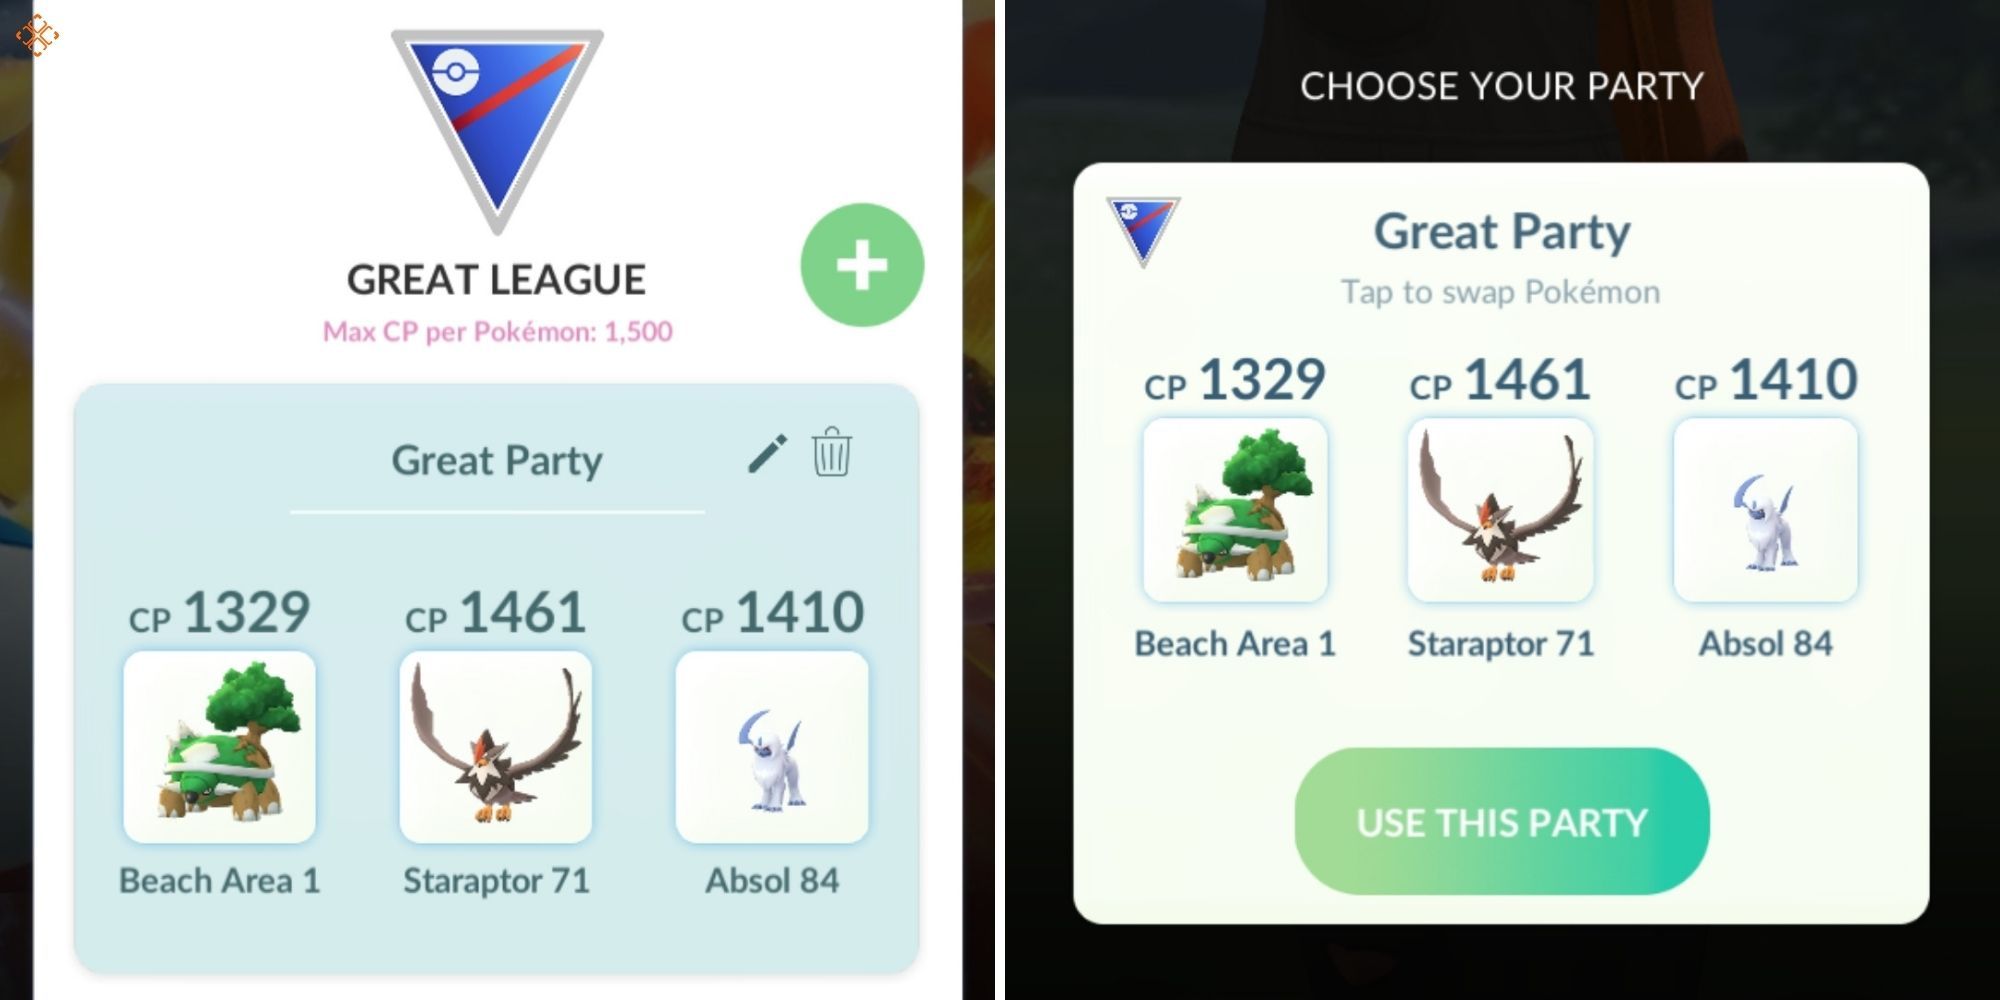 Pokemon GO - Party setup for the Great League